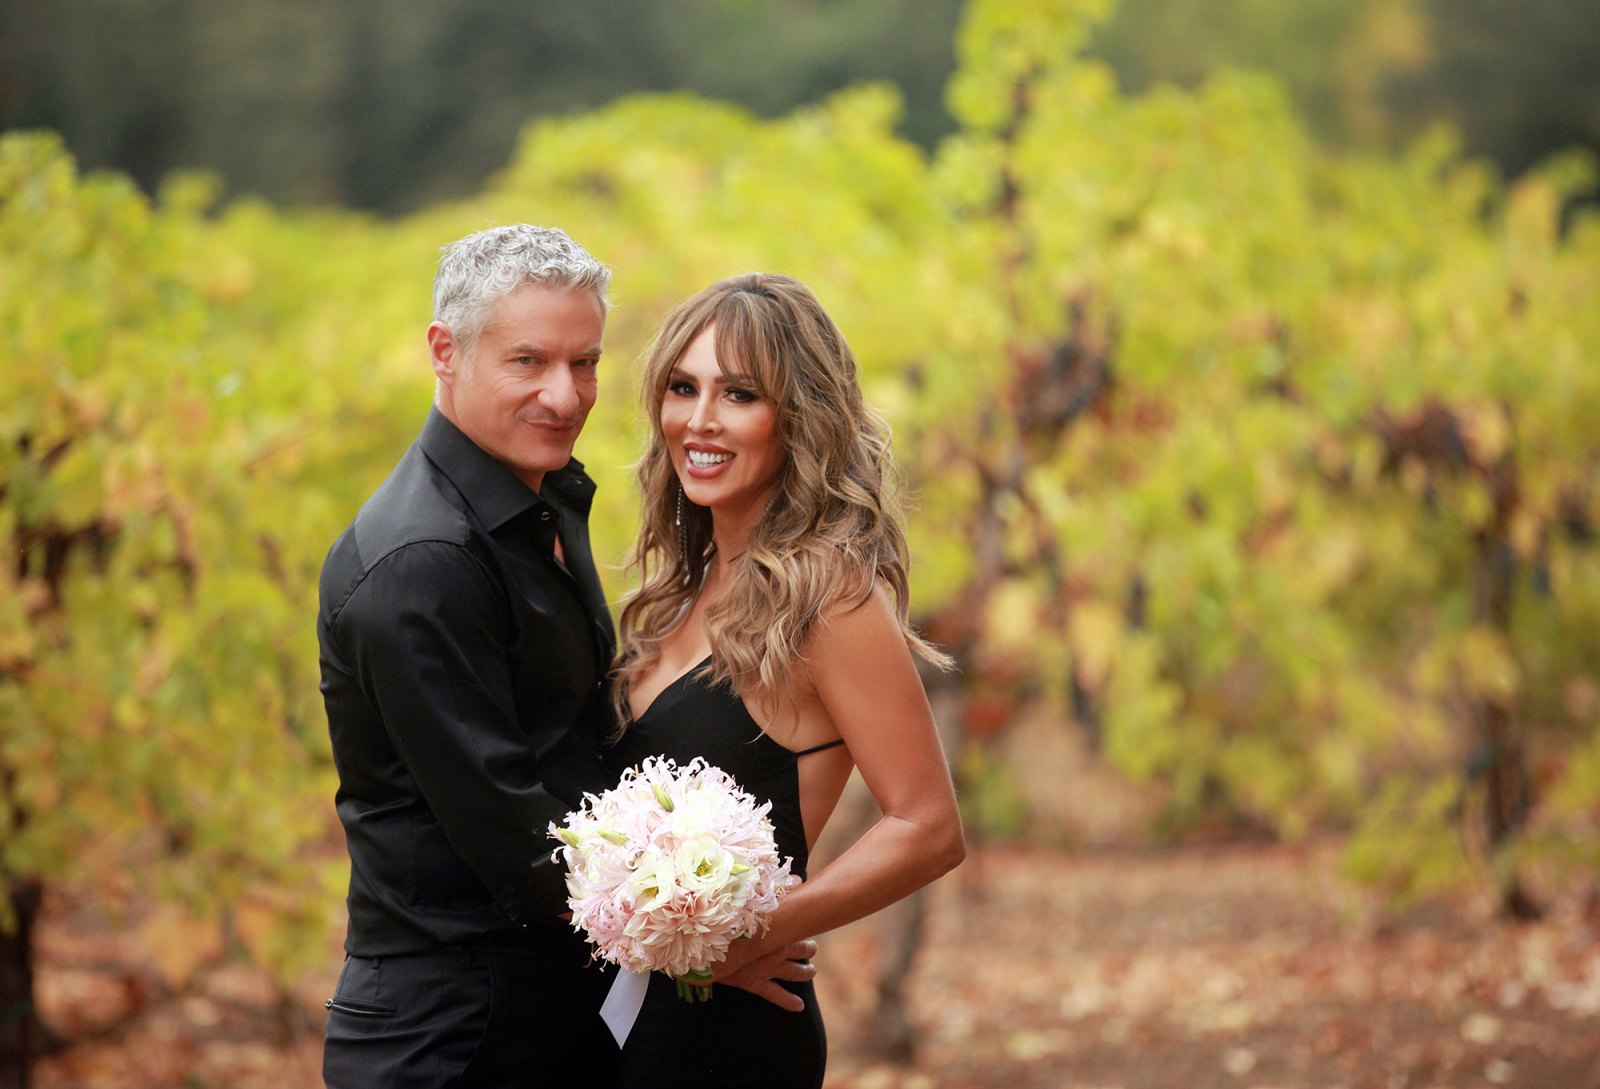 RHOC’s Kelly Dodd Weds Fiance Rick Leventhal in Romantic Ceremony